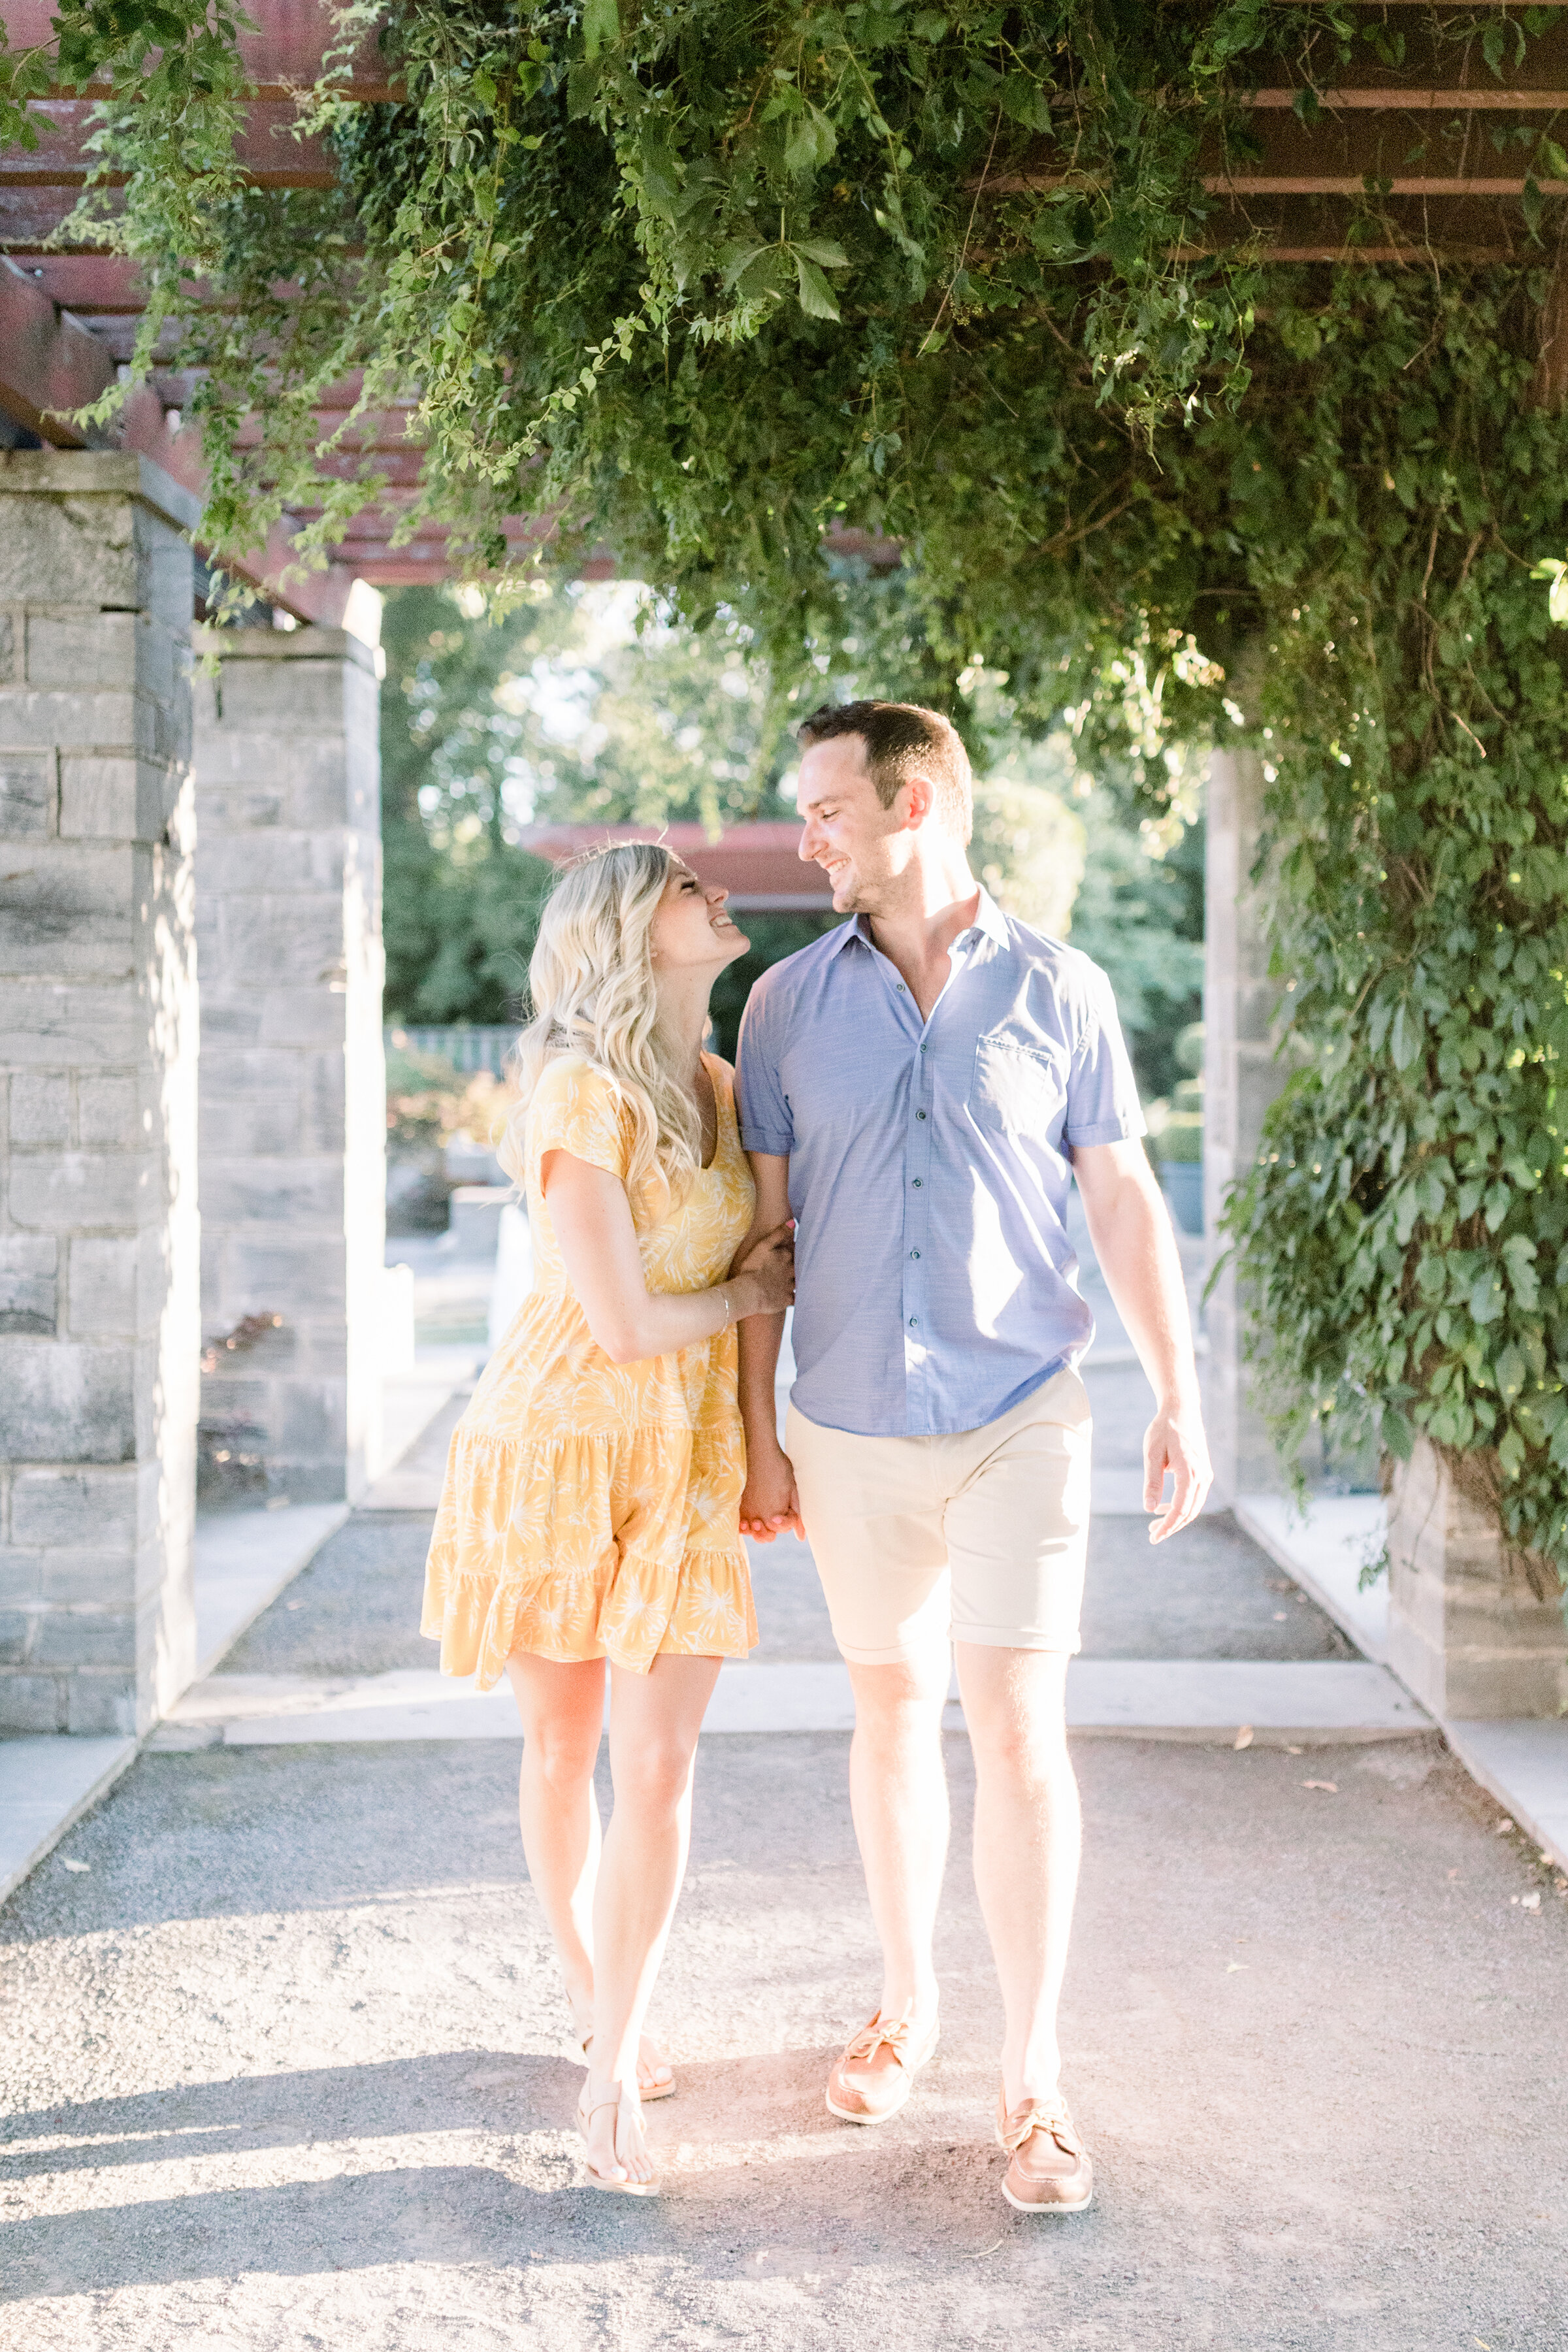  A glowing couple walk through a vine covered terrace in a beautiful Botanical Garden styled engagement photo shoot by Chelsea Mason Photography. Engagement session goals couple goals couple pose inspiration ideas and goals sundress goals spring enga